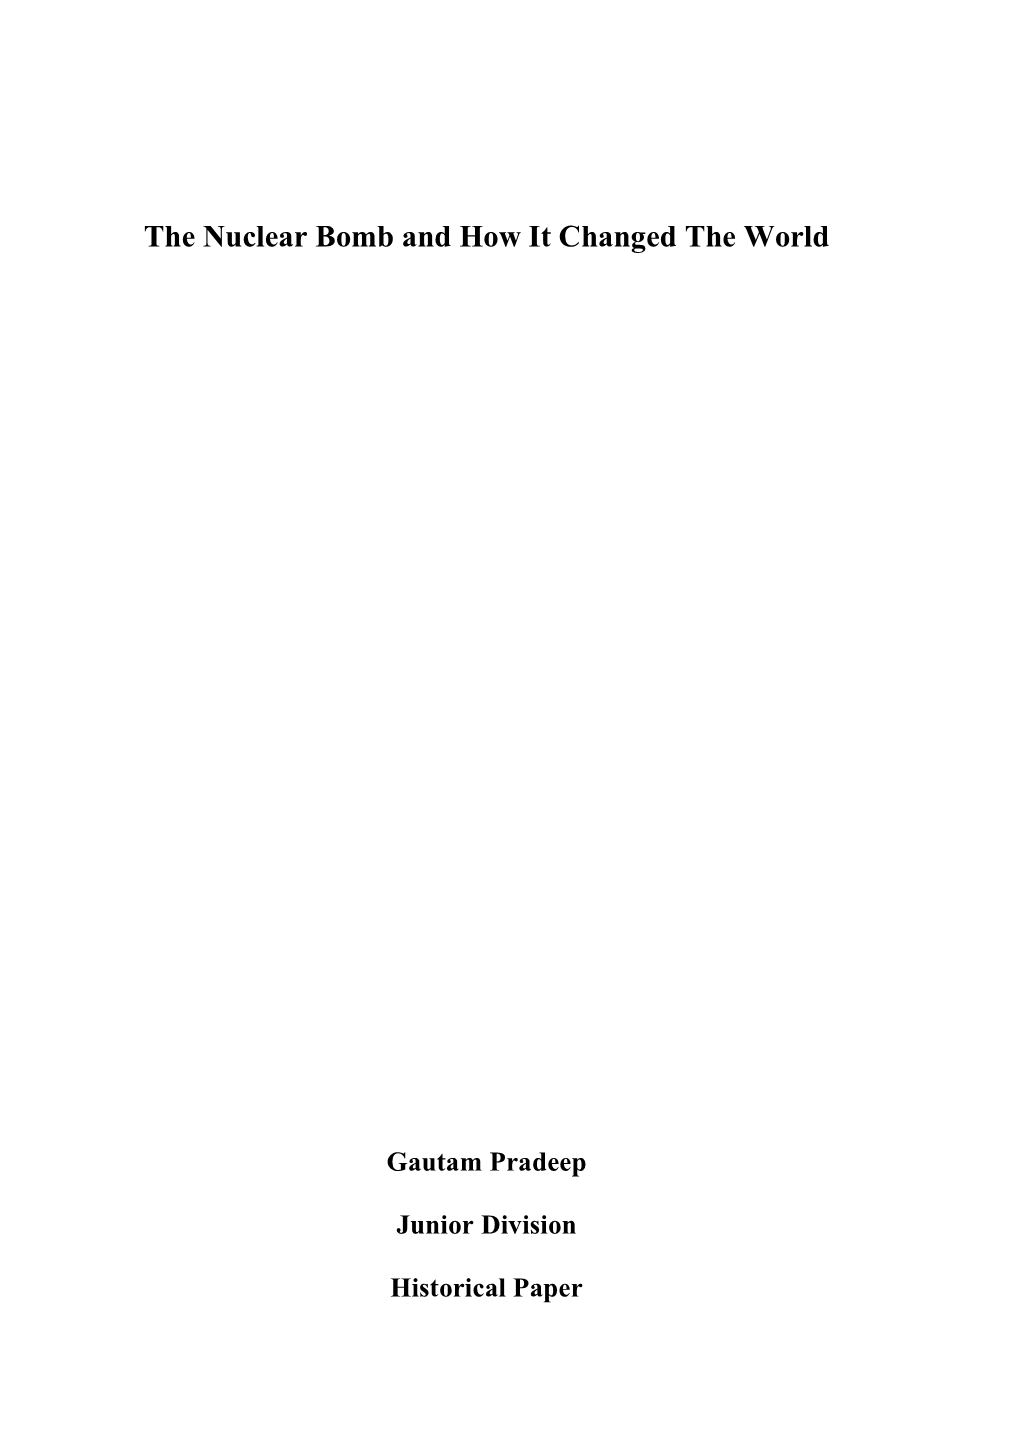 The Nuclear Bomb and How It Changed the World